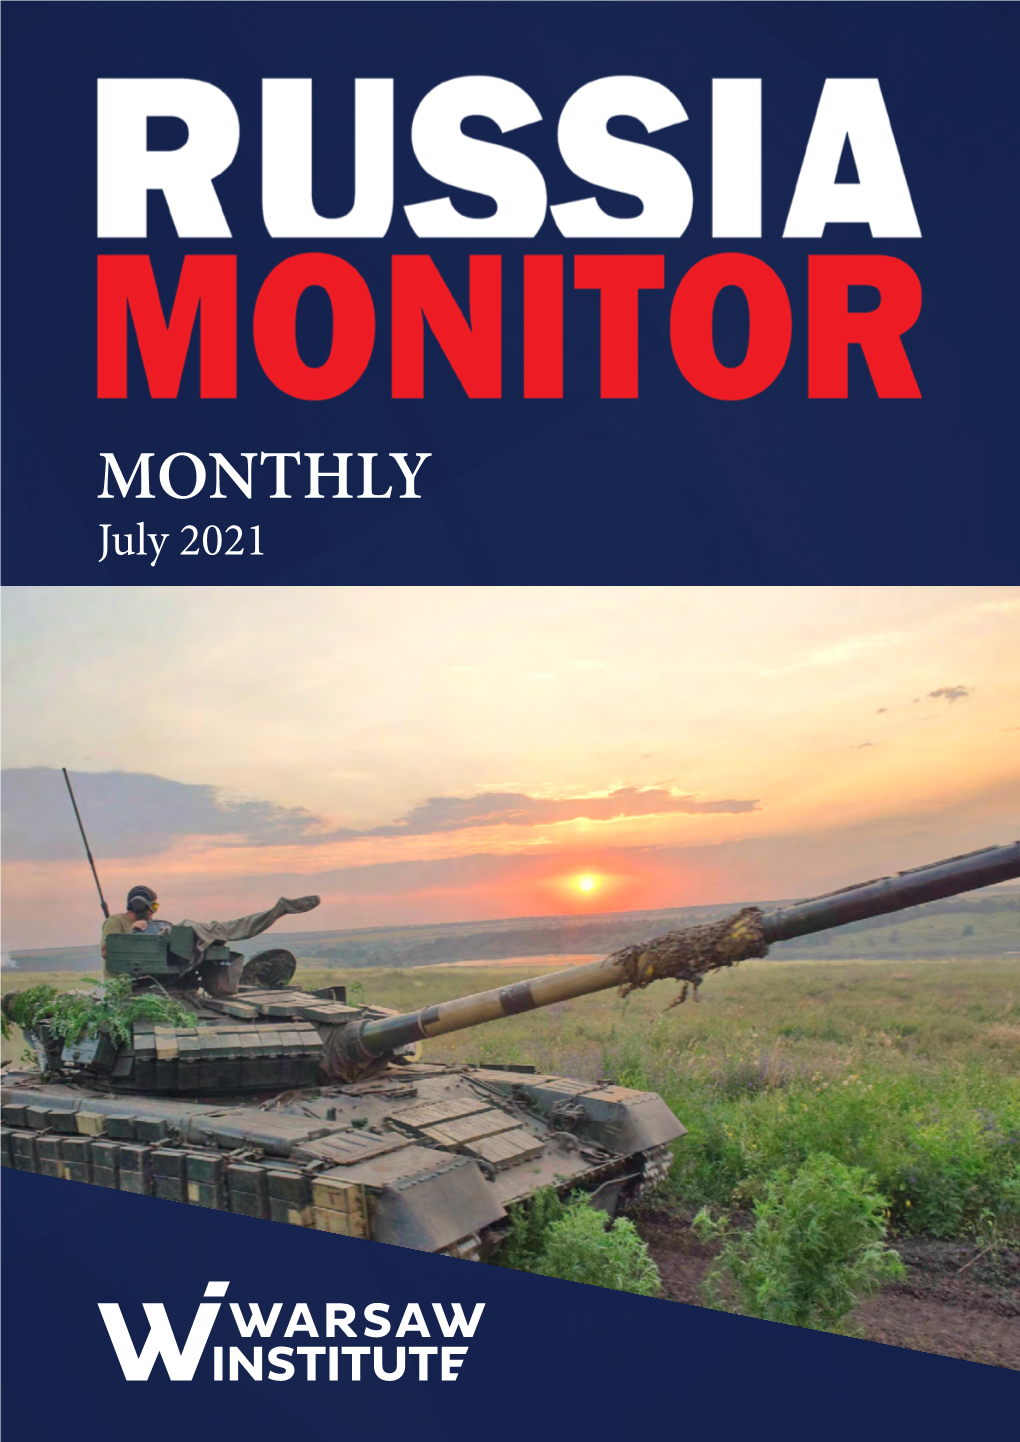 MONTHLY July 2021 CONTENTS